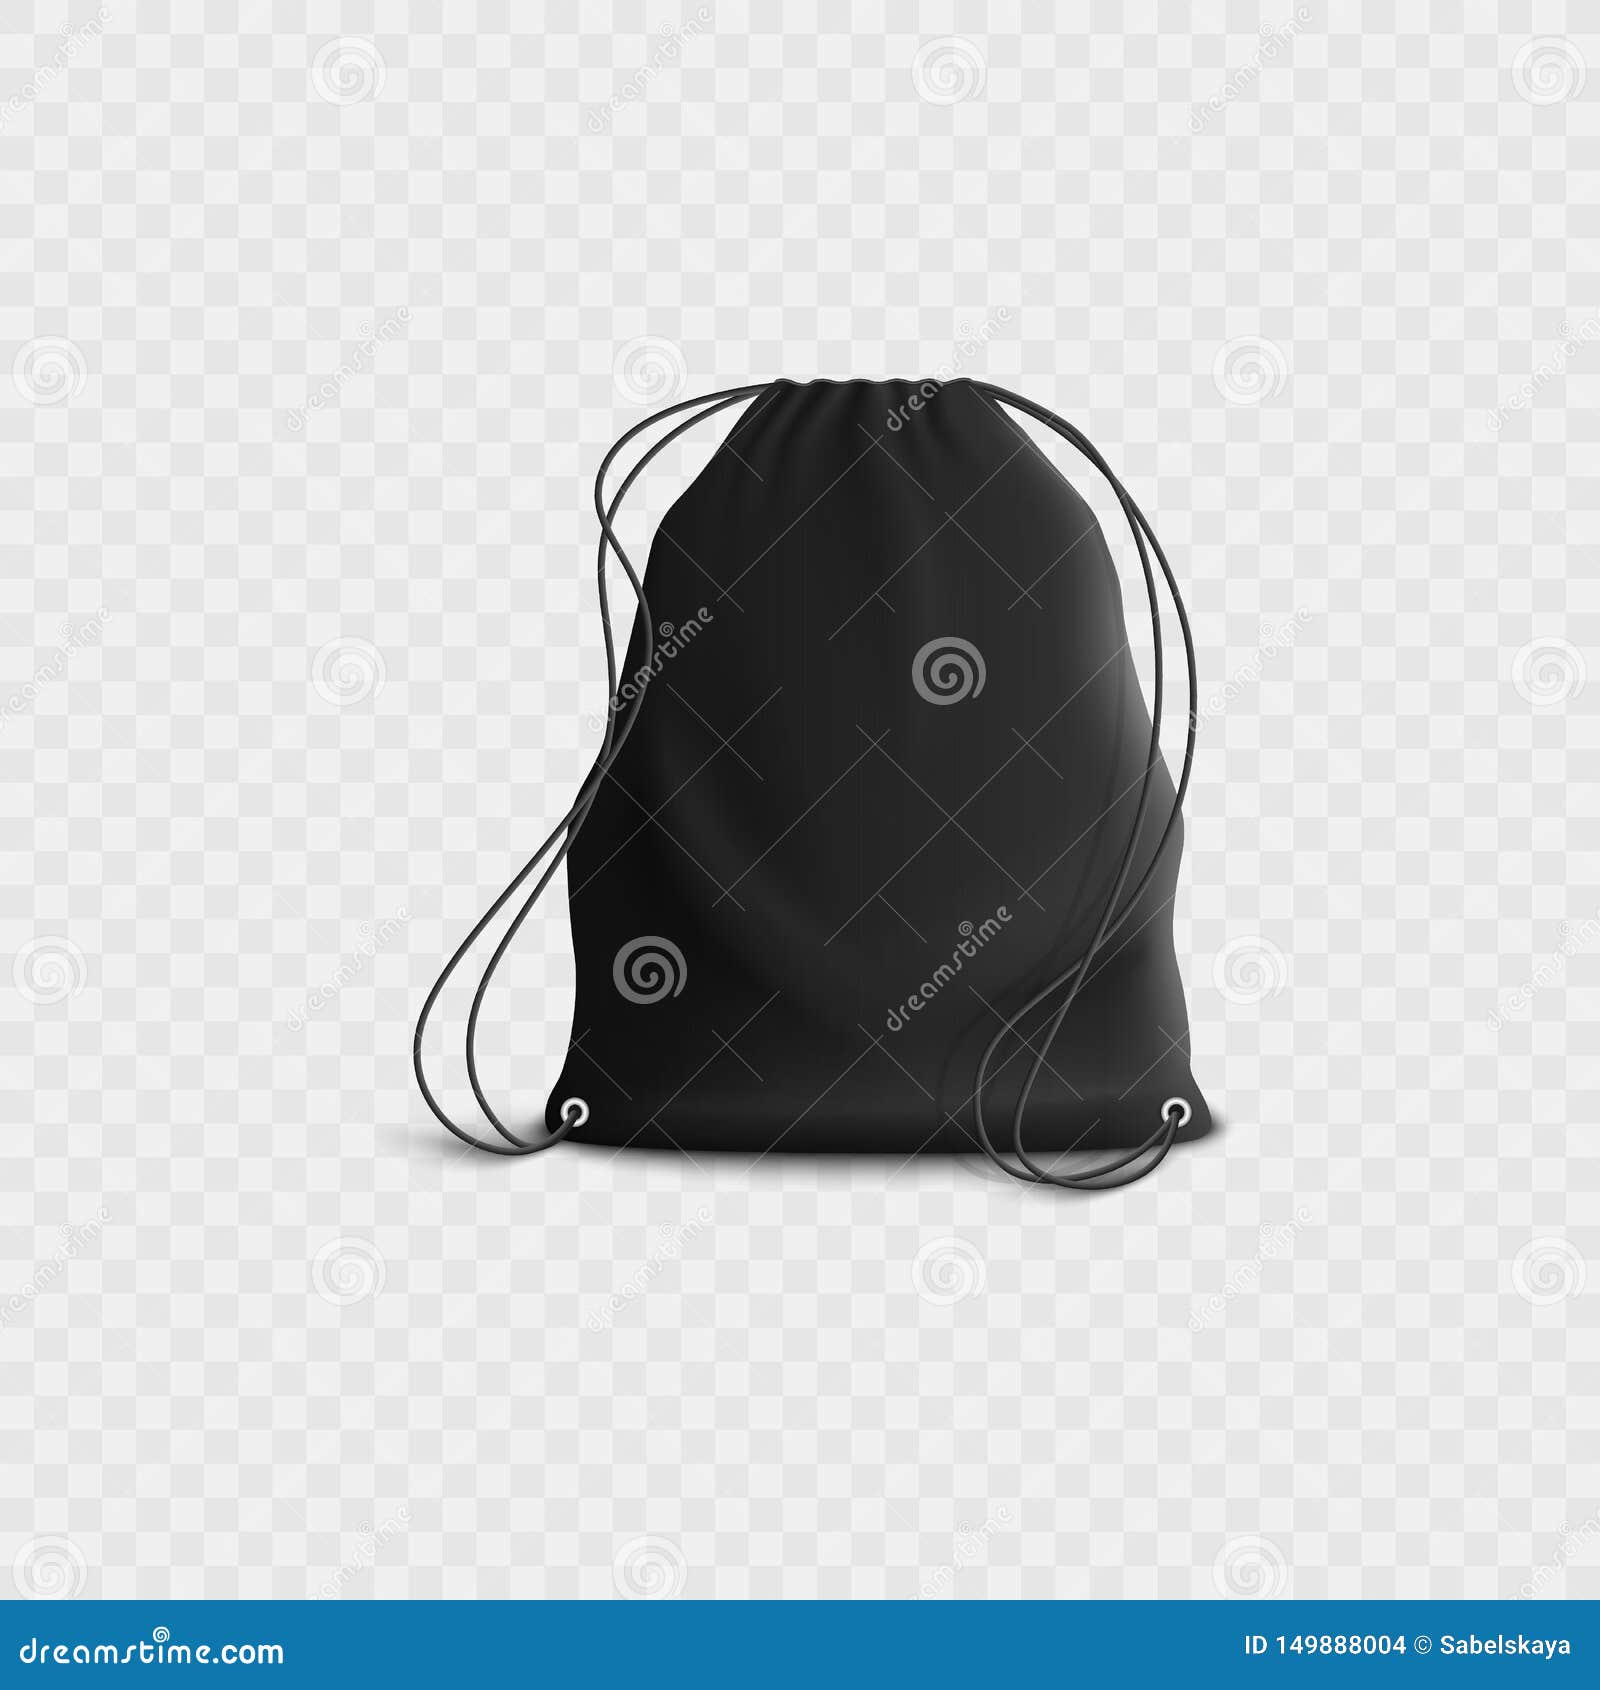 Download Black Backpack With Drawstring, Realistic Blank Sports Gym ...